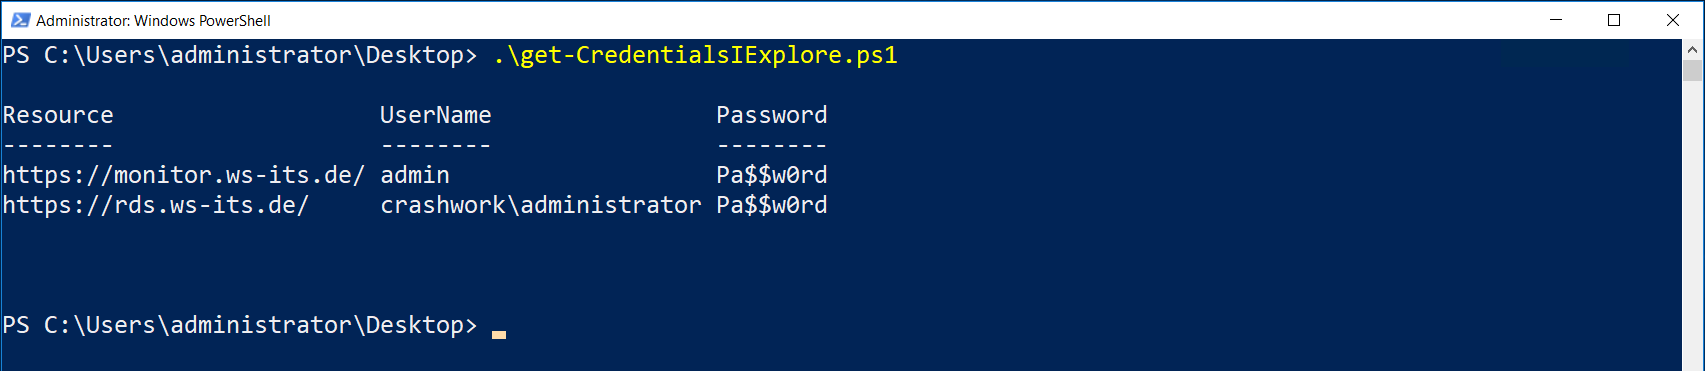 PS-Security &#8211; PowerShell Constrained Language Mode (PSLockDown)